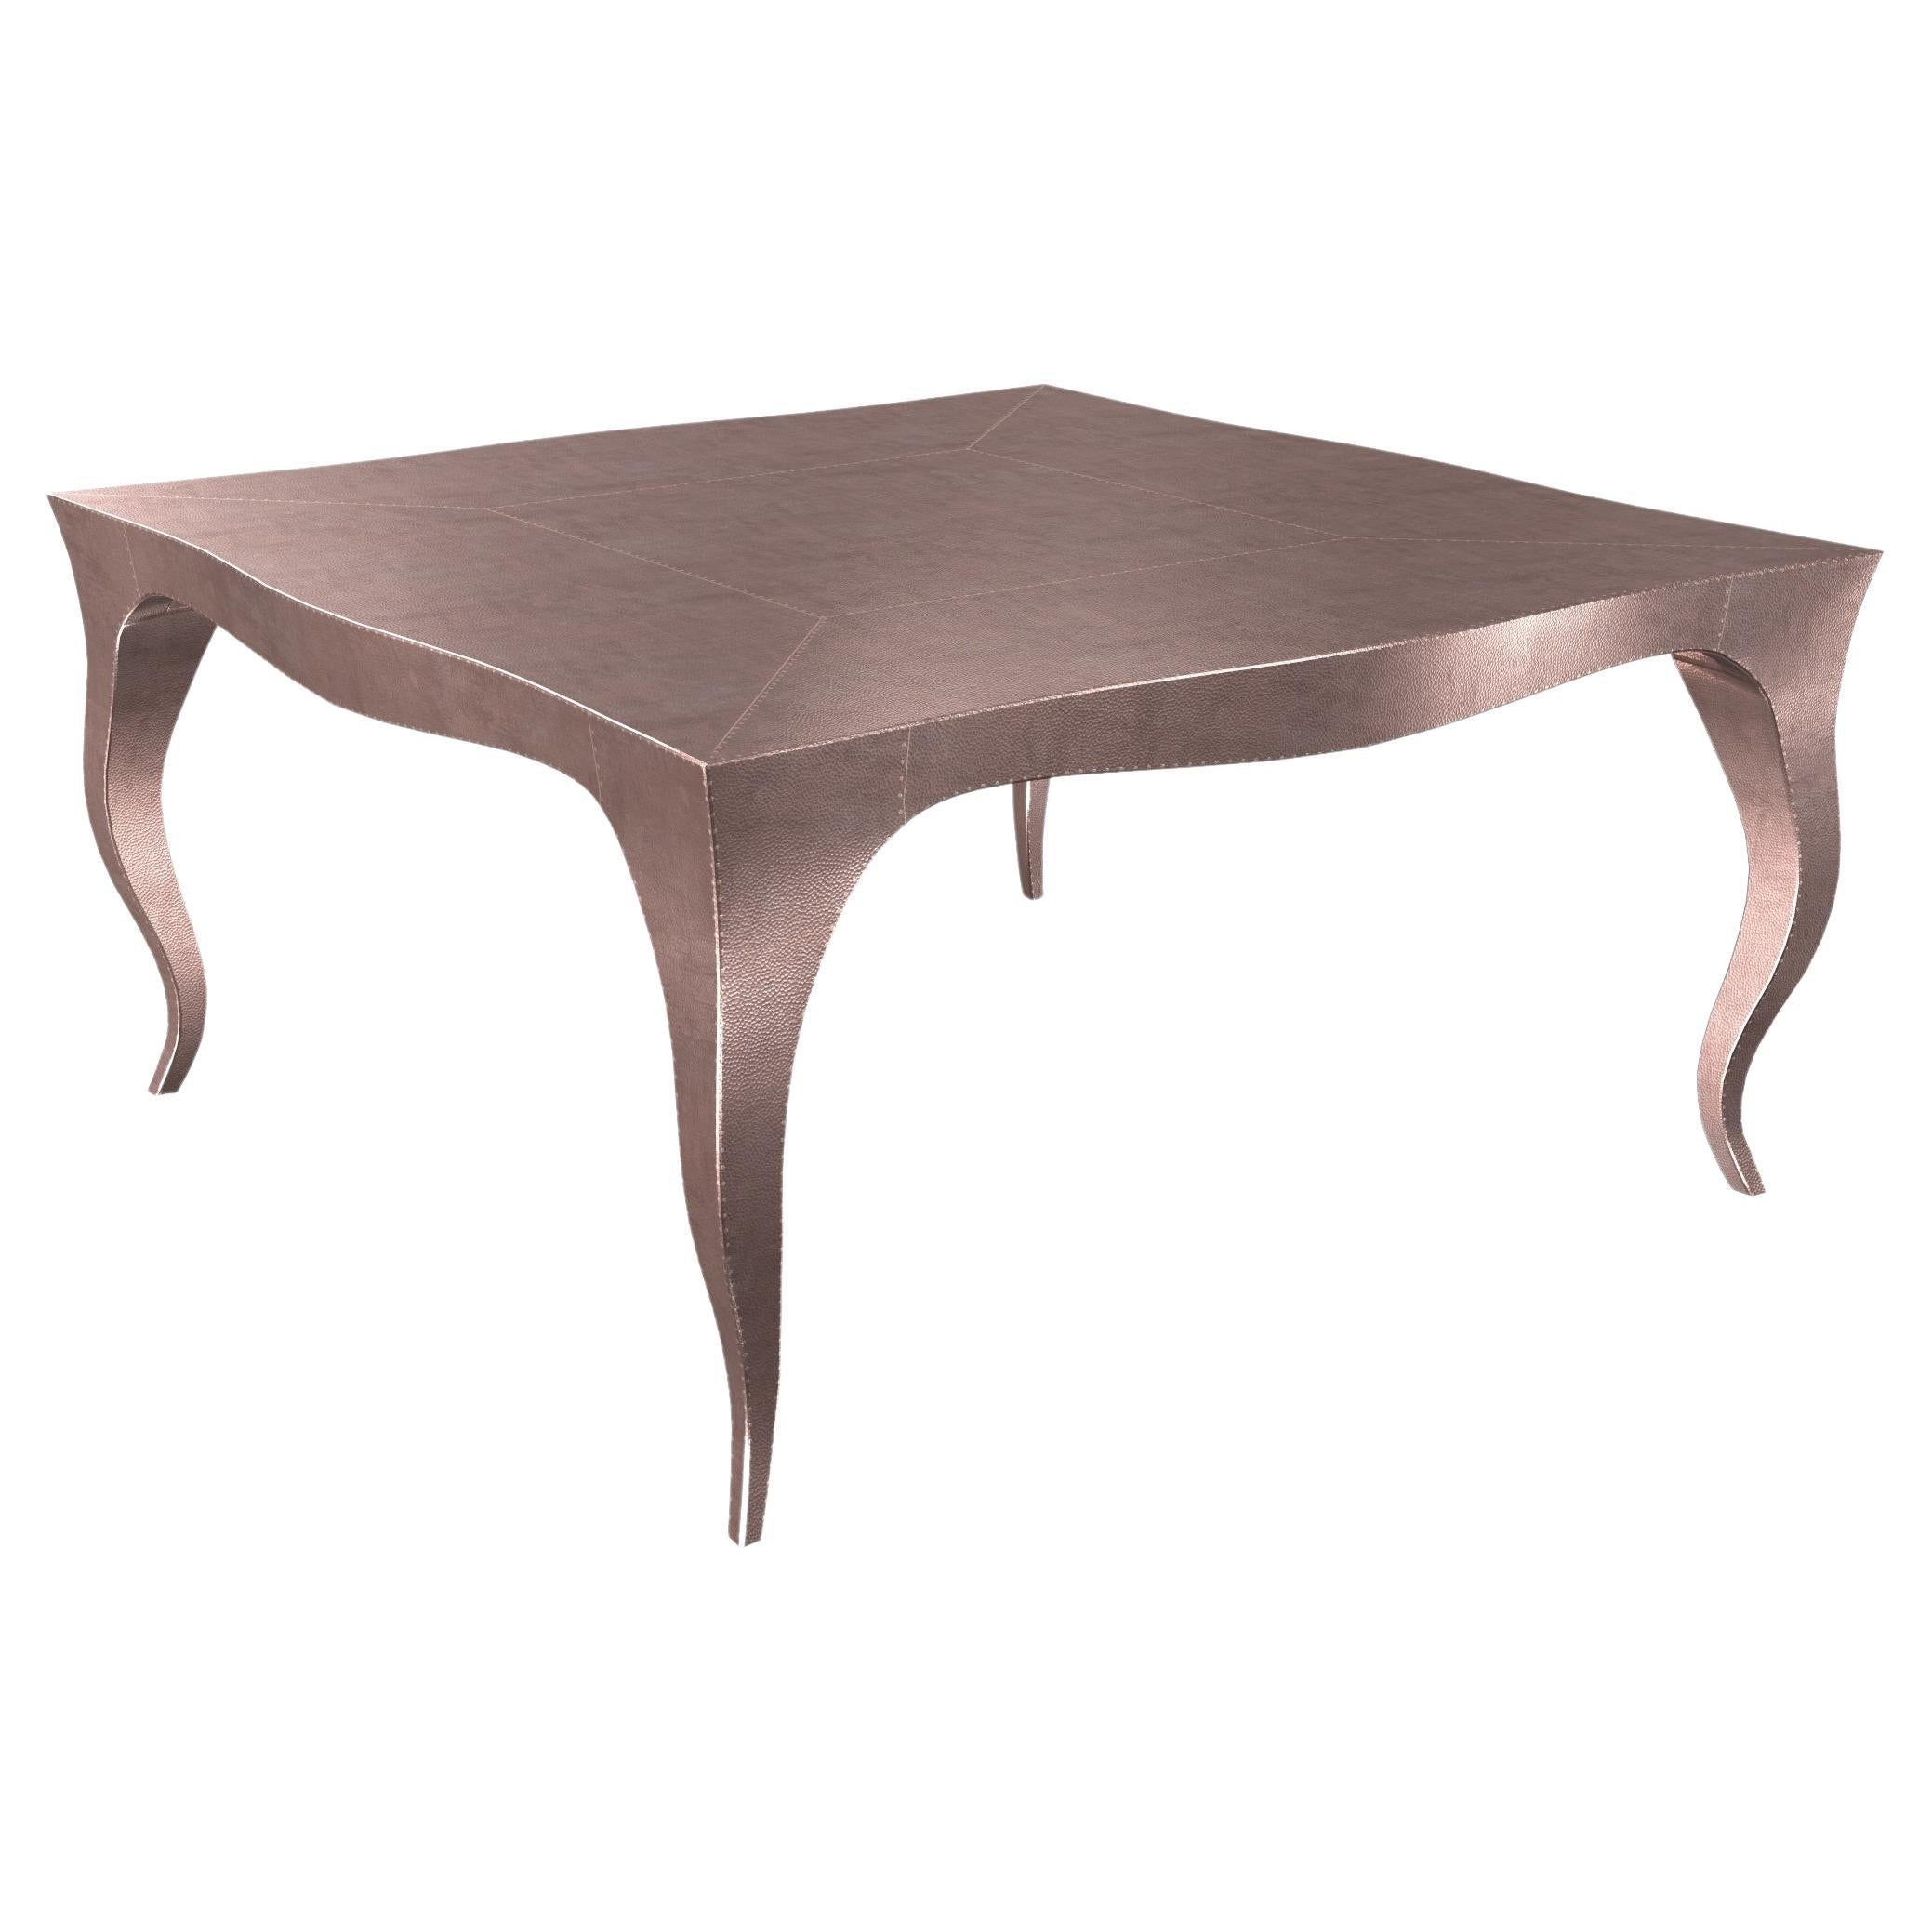 Louise Art Deco Nesting Tables Mid. Hammered Copper 18.5x18.5x10 inch by Paul M. For Sale